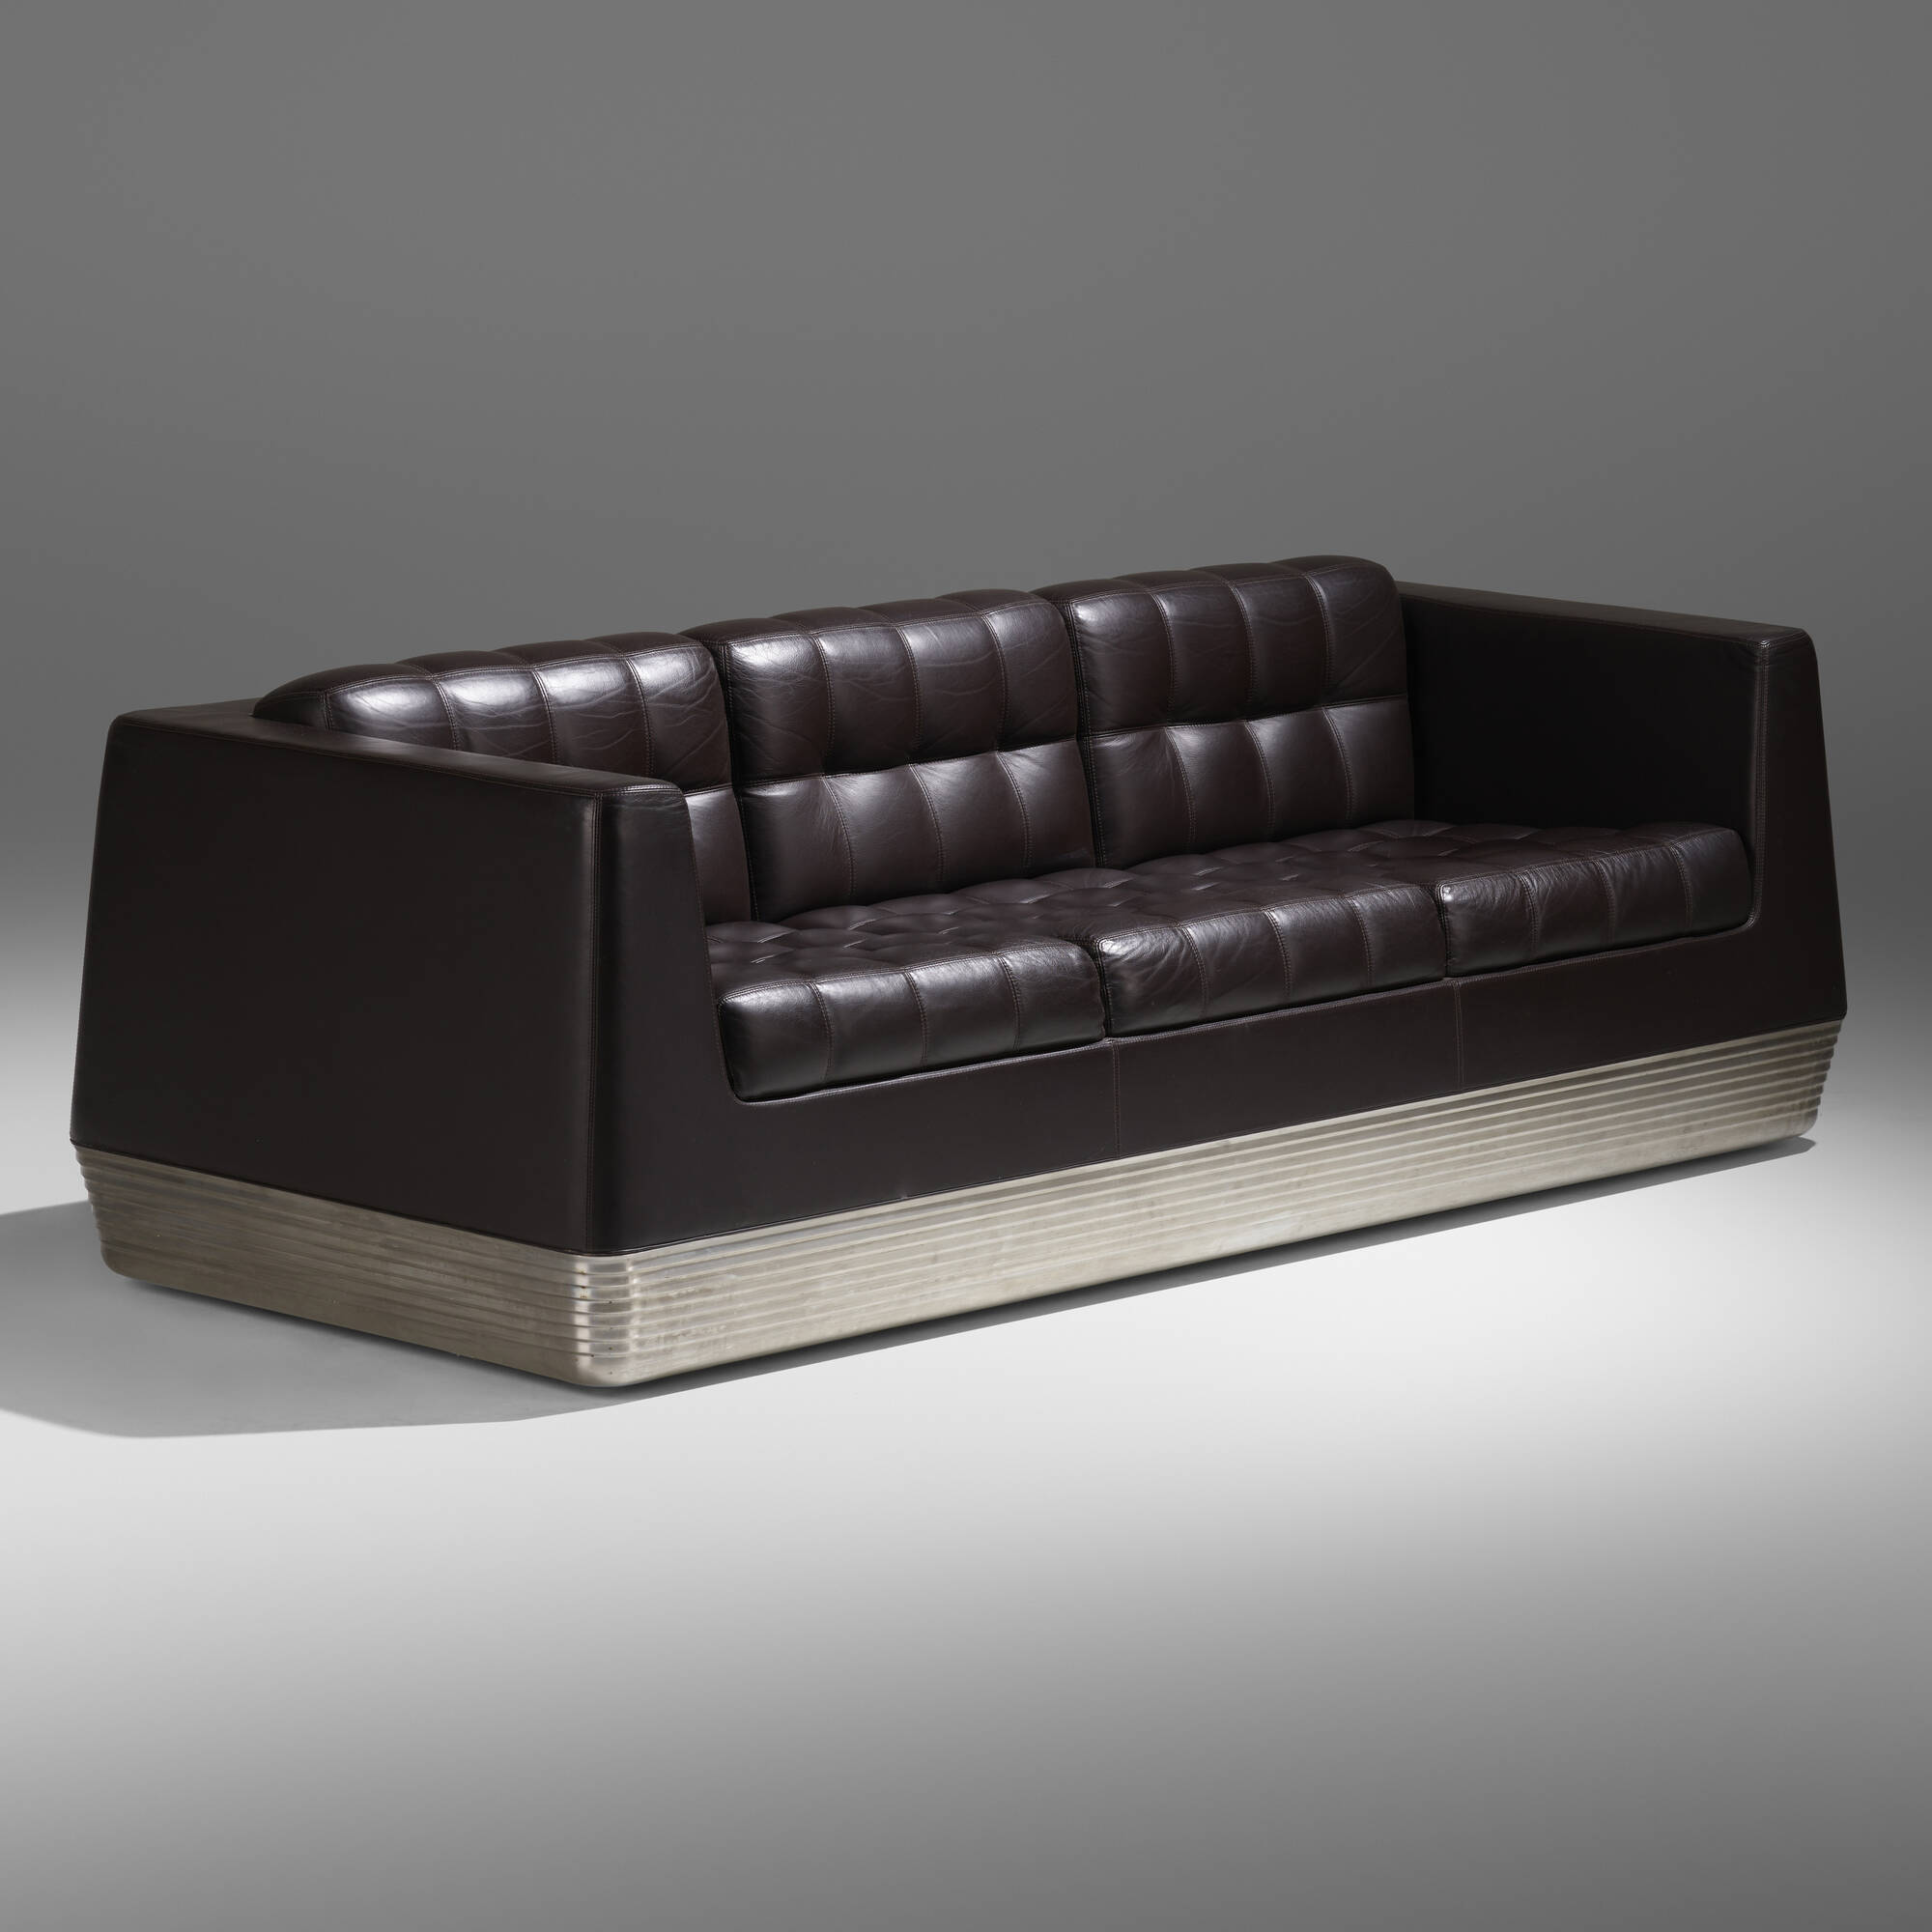 The Lockheed Lounge by Marc Newson is the most expensive sofa in the world